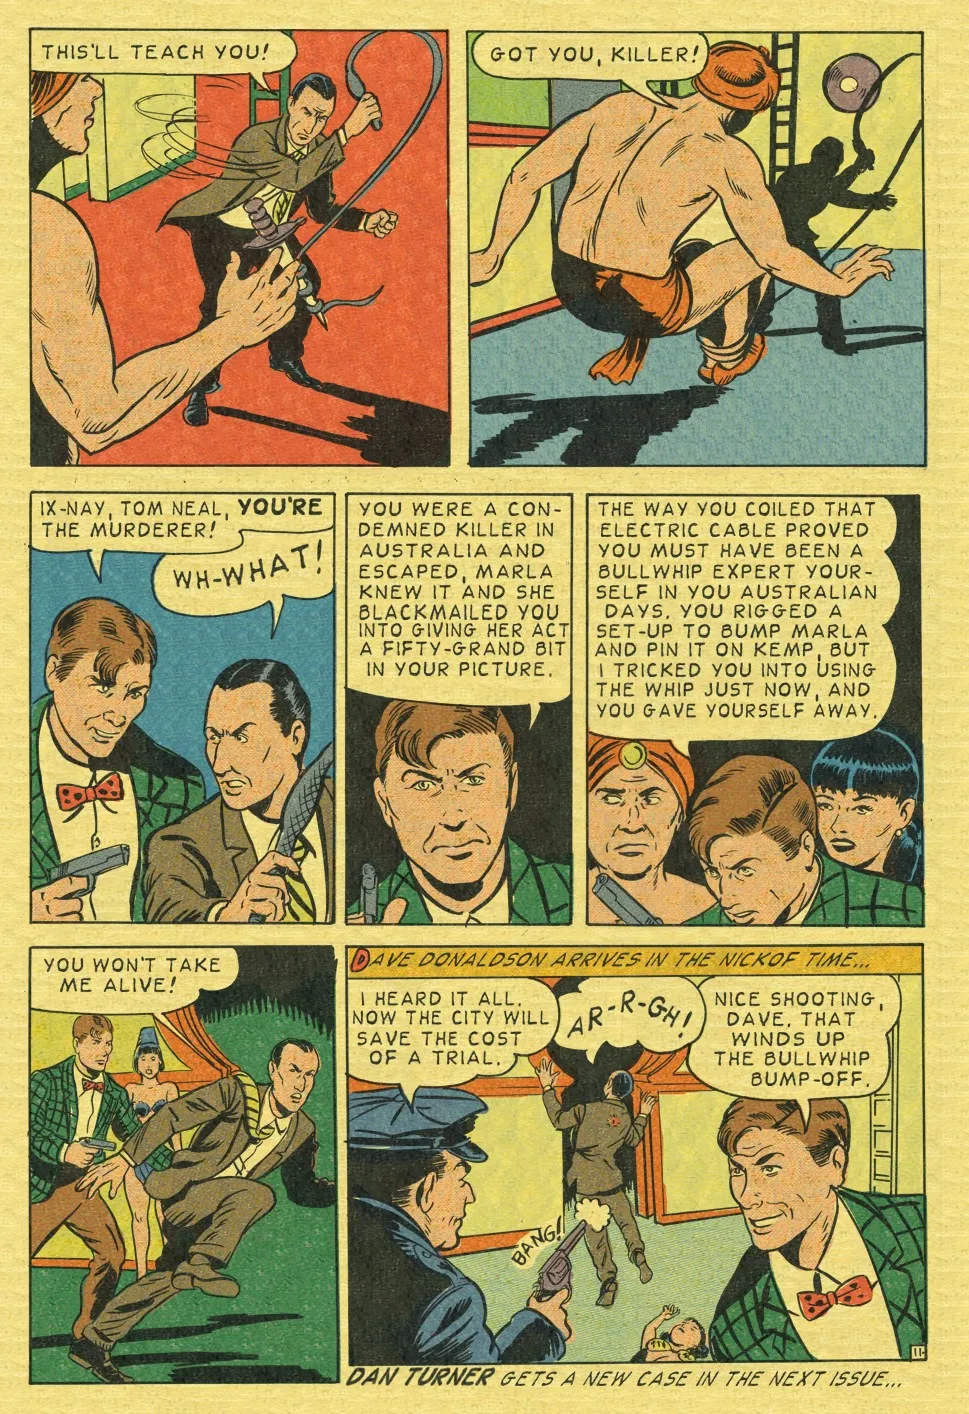 Crime Smashers! 2- The Wertham Files - Page 22